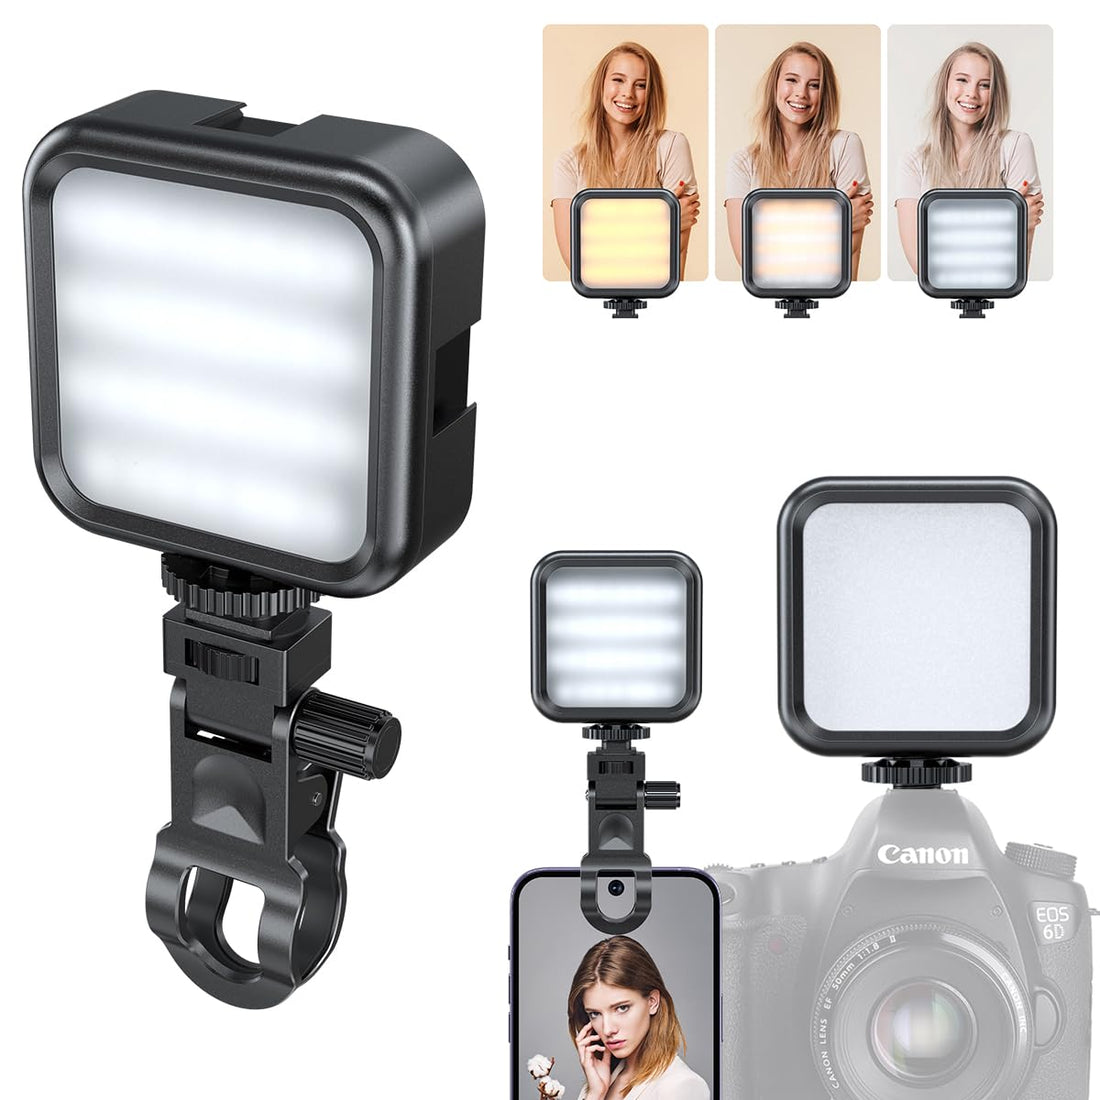 Pixel LED Adjusted 3 Modes Phone Selfie Light Video Conference Lights Rechargeable Clip Fill Video Lighting with Front, for iPhone, Camera, Android, iPad, Laptop, for Makeup, TikTok, Selfie, Vlog